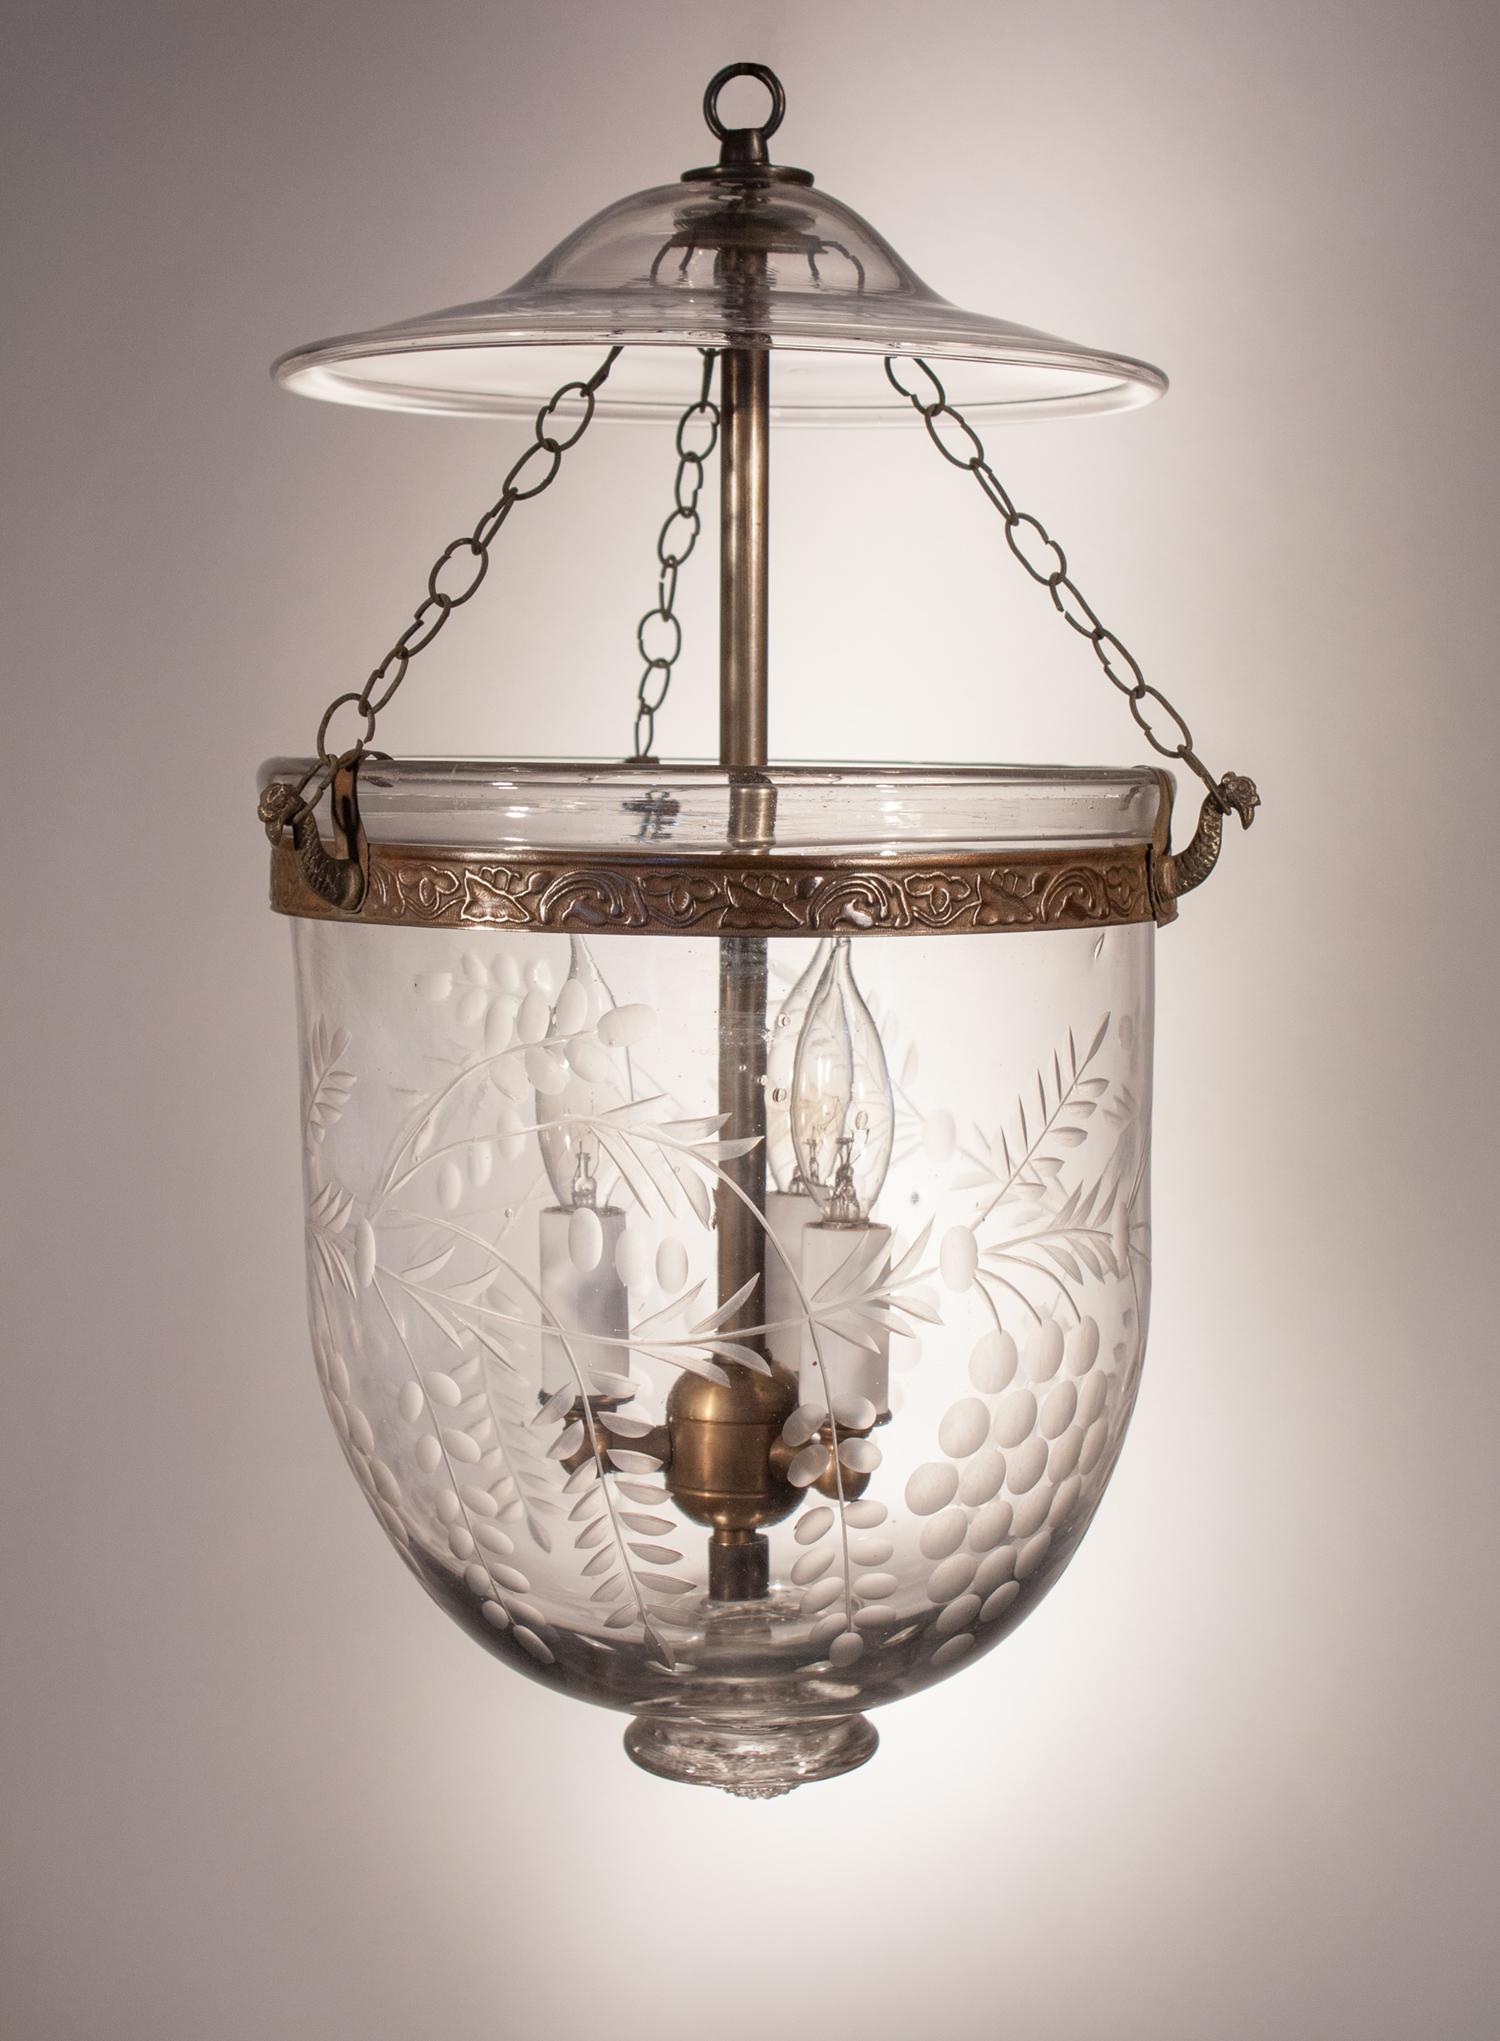 An antique bell jar lantern with etched grape and vine motif. This charming circa 1890 lantern has its original smoke bell and chains. The embossed brass band, which has a meandering vine design, has been replaced to ensure the pendant's security.